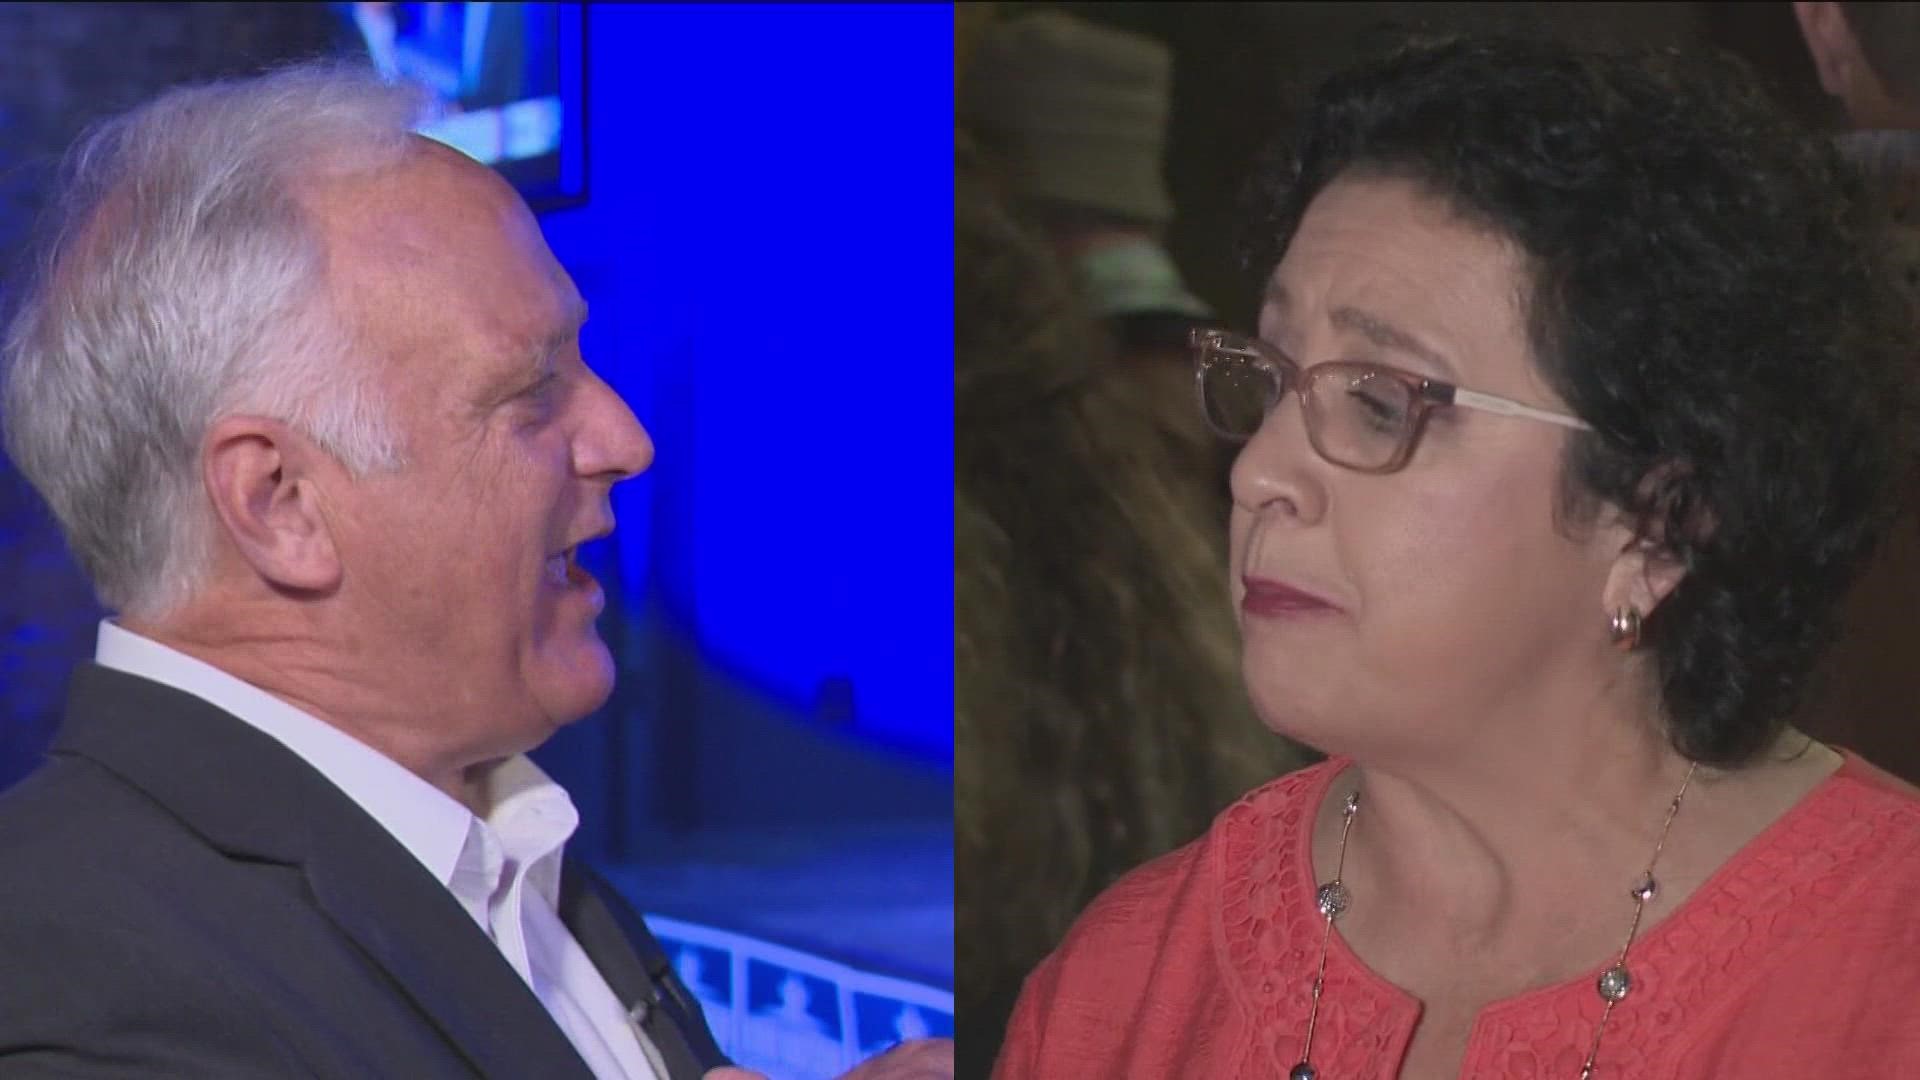 No mayoral candidates earned more than 50% of the vote, so the contest is going to a runoff between State Rep. Celia Israel and former Austin mayor Kirk Watson.